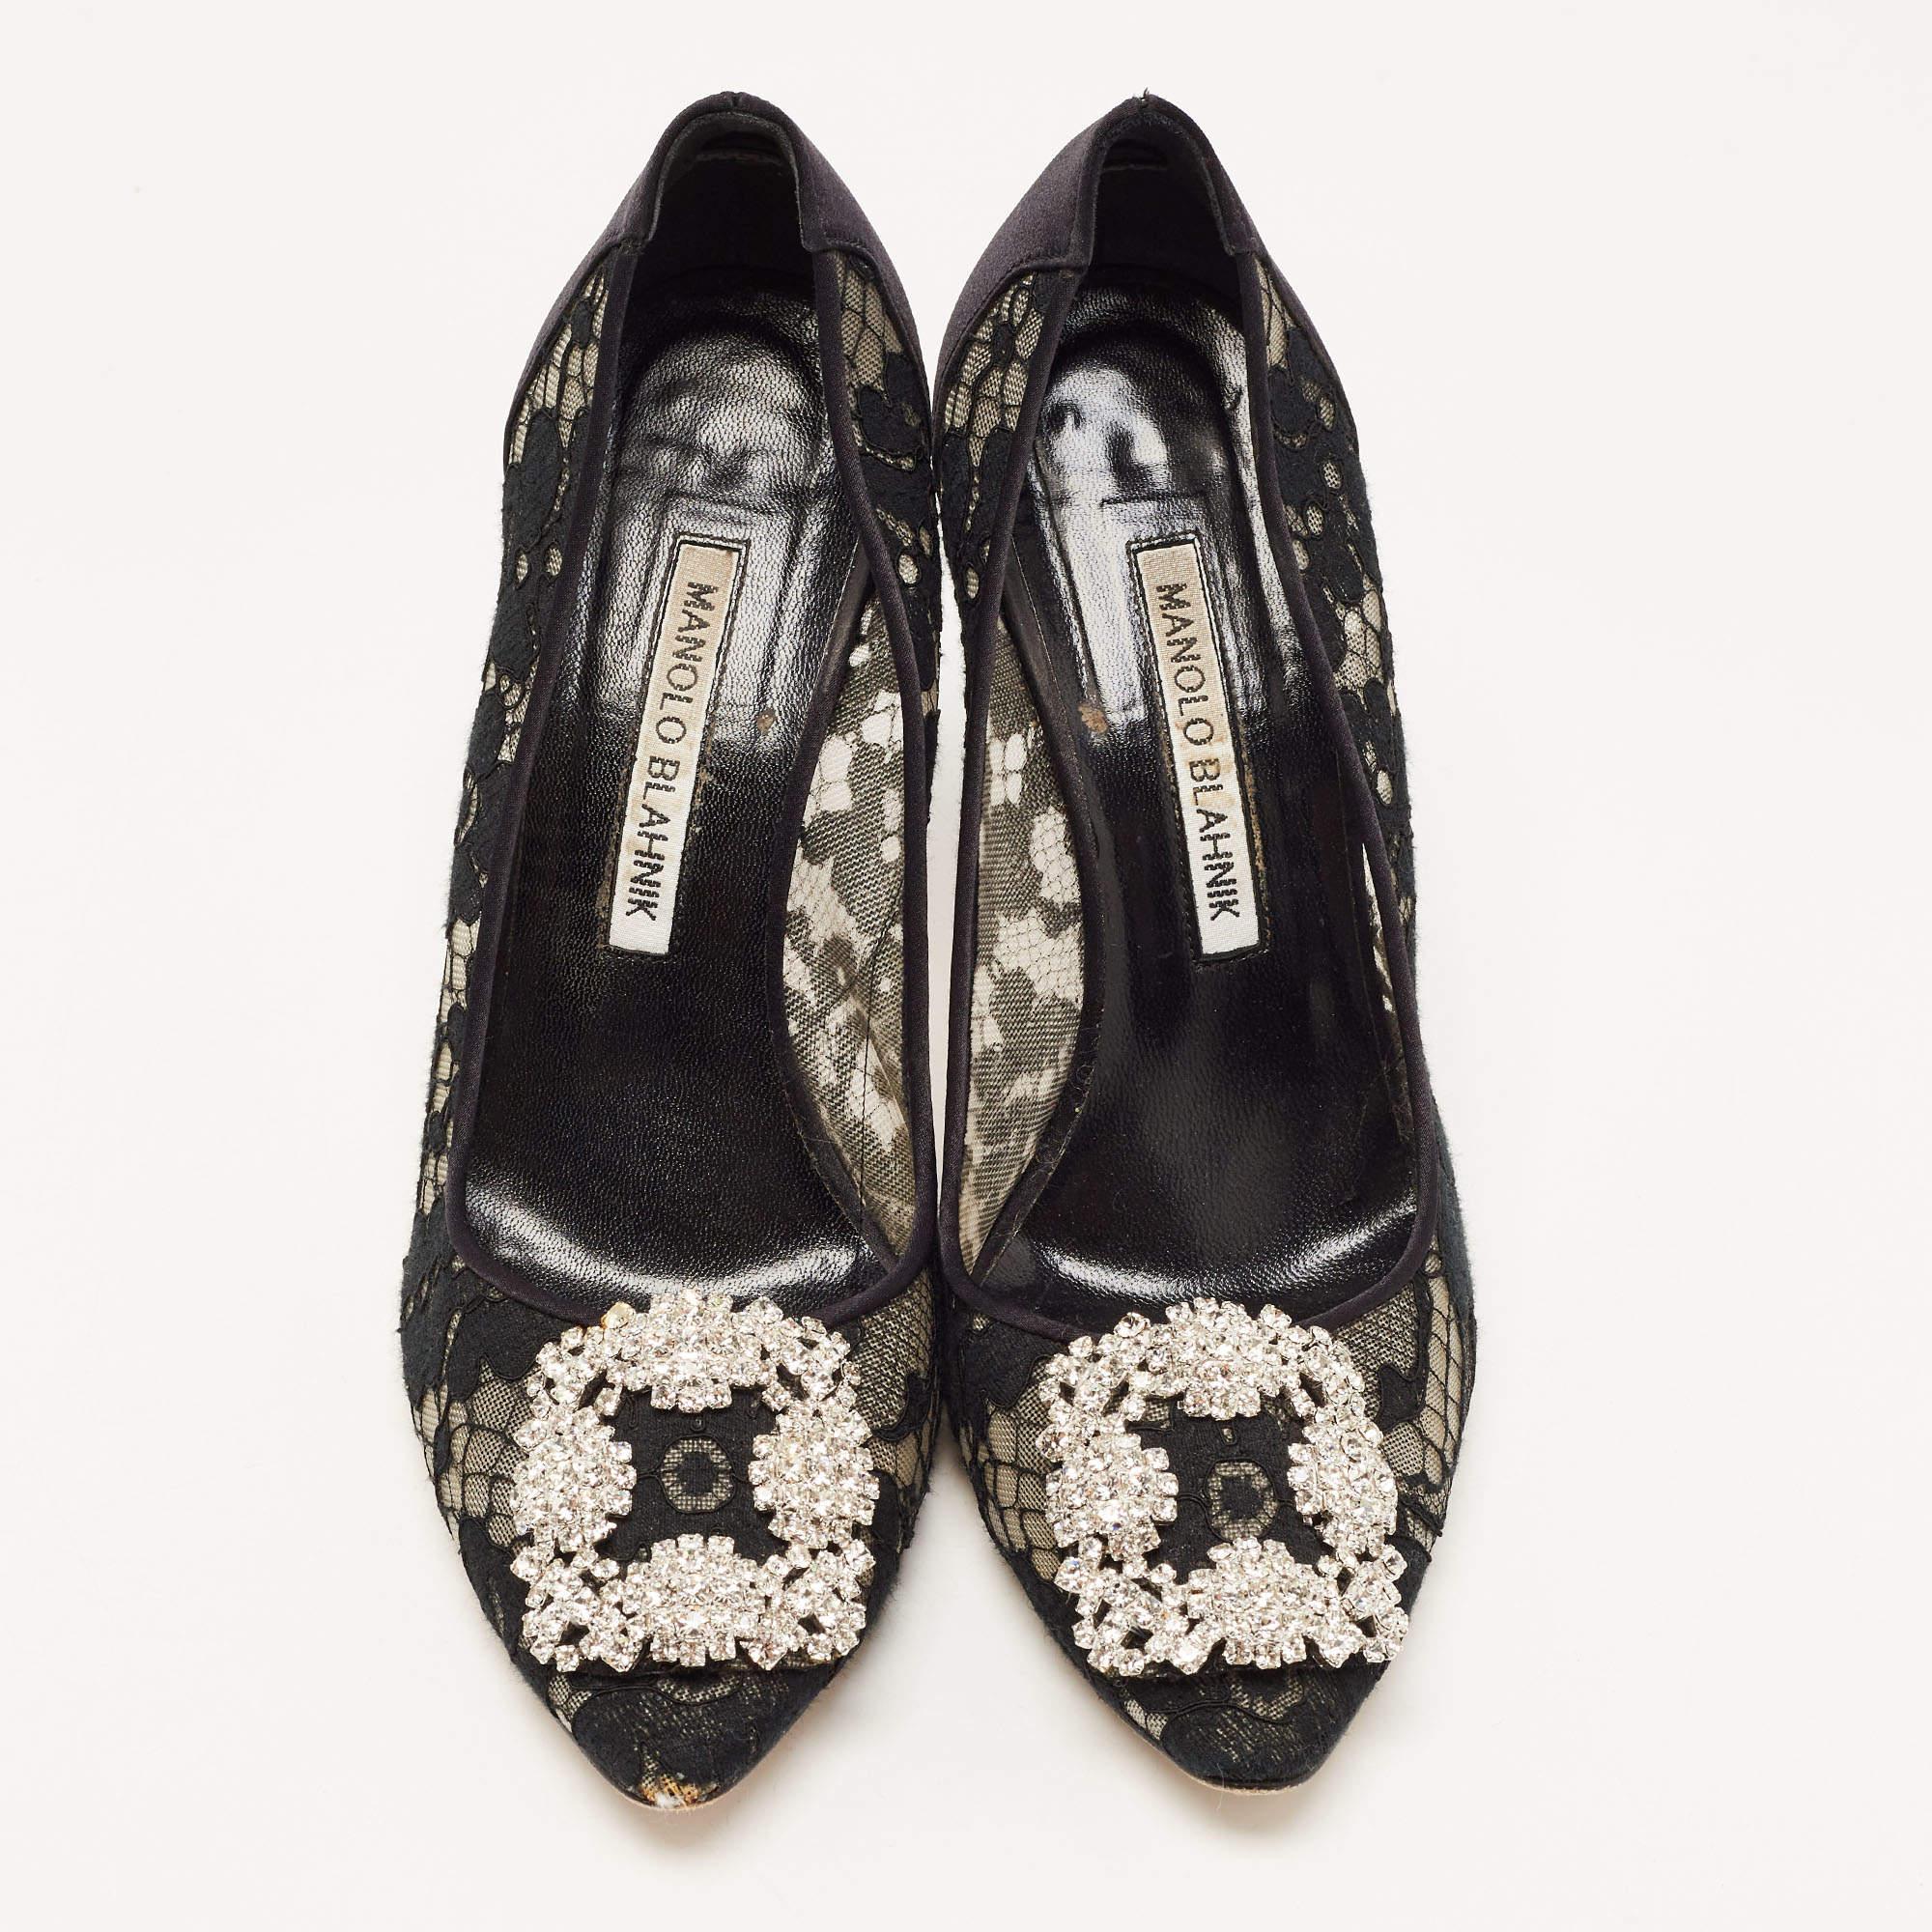 The 9.5cm heels of this pair of Manolo Blahnik pumps will reflect grace and luxury in every step. Made from satin and lace, it is made striking with crystal-embellished buckle detailing on the toes and exhibits branded insoles.

Includes: Original